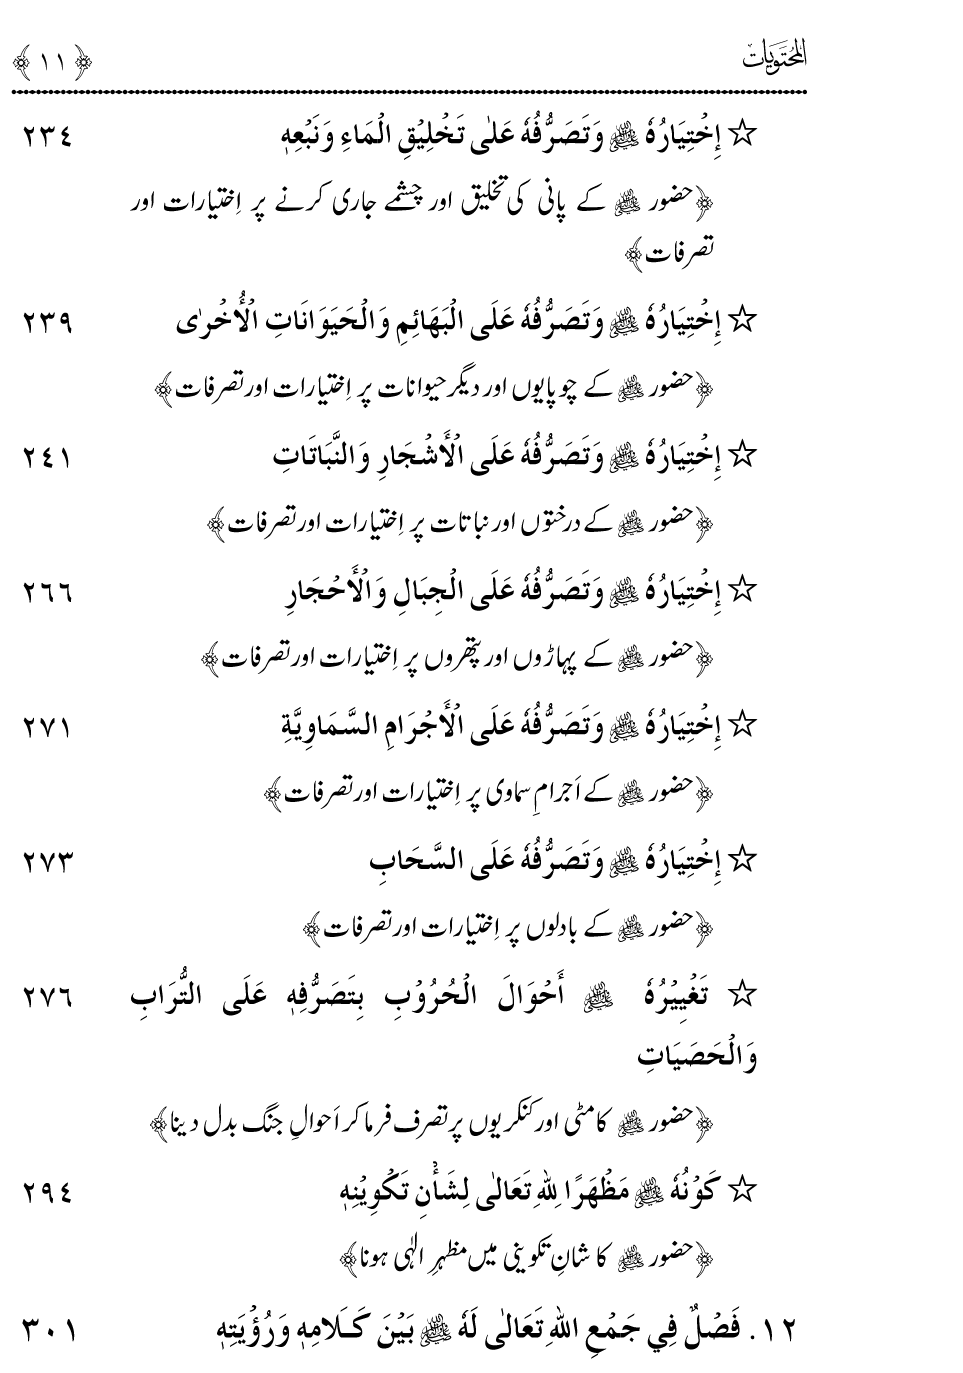 Ladders of Sunna for Deliverance from Deviation and Tribulations (Vol. 4)